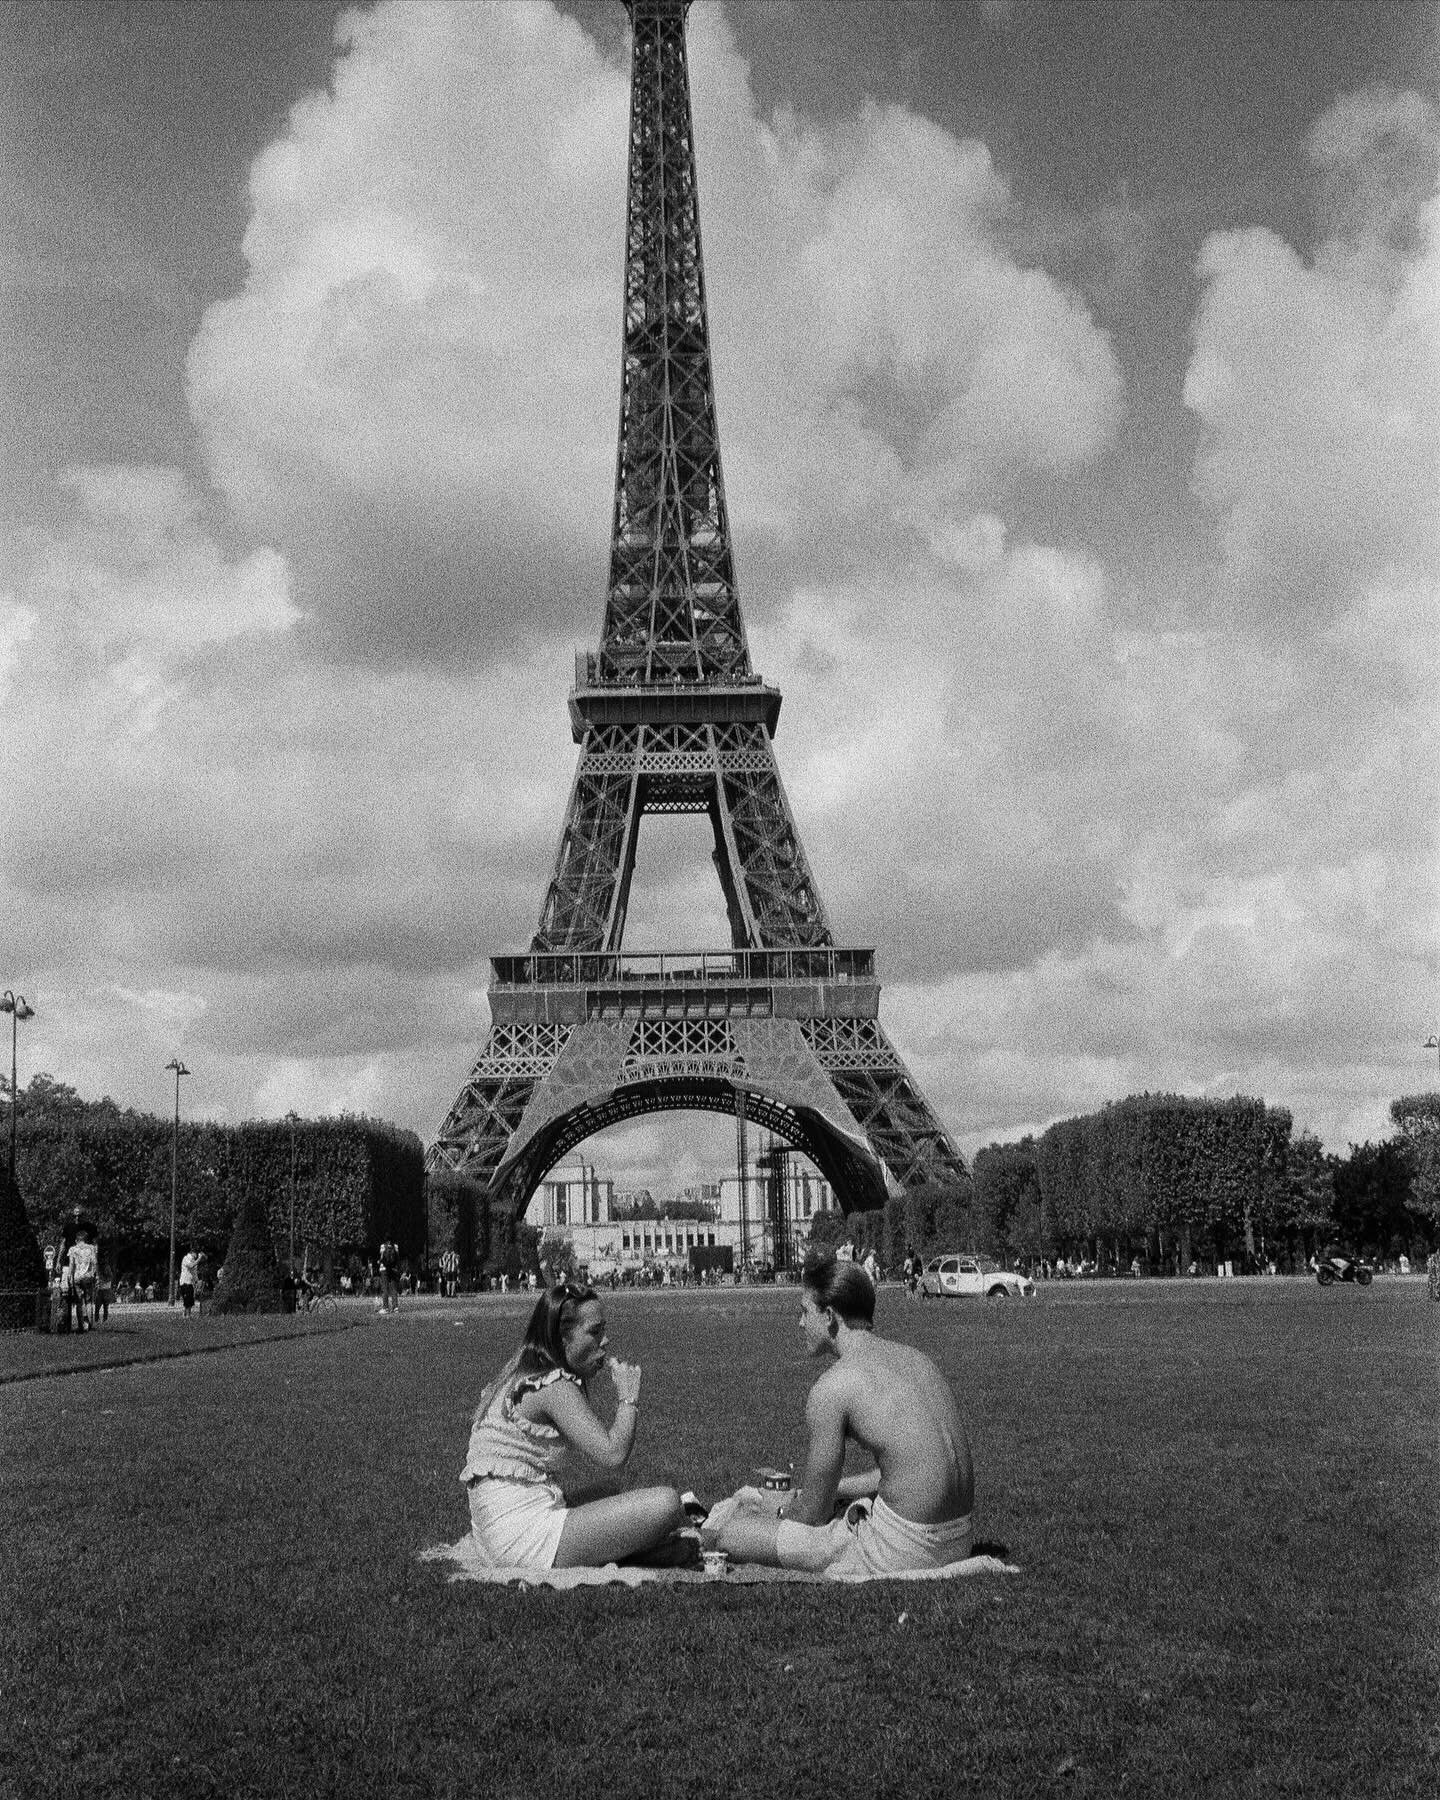 One of my favourite photos I&rsquo;ve ever taken. I adore the casualness of this moment. Young lovers on a daytime date with one of the most iconic symbols of love in the world sitting in the background. Simple clothes, unstaged and perfect. Happy Va